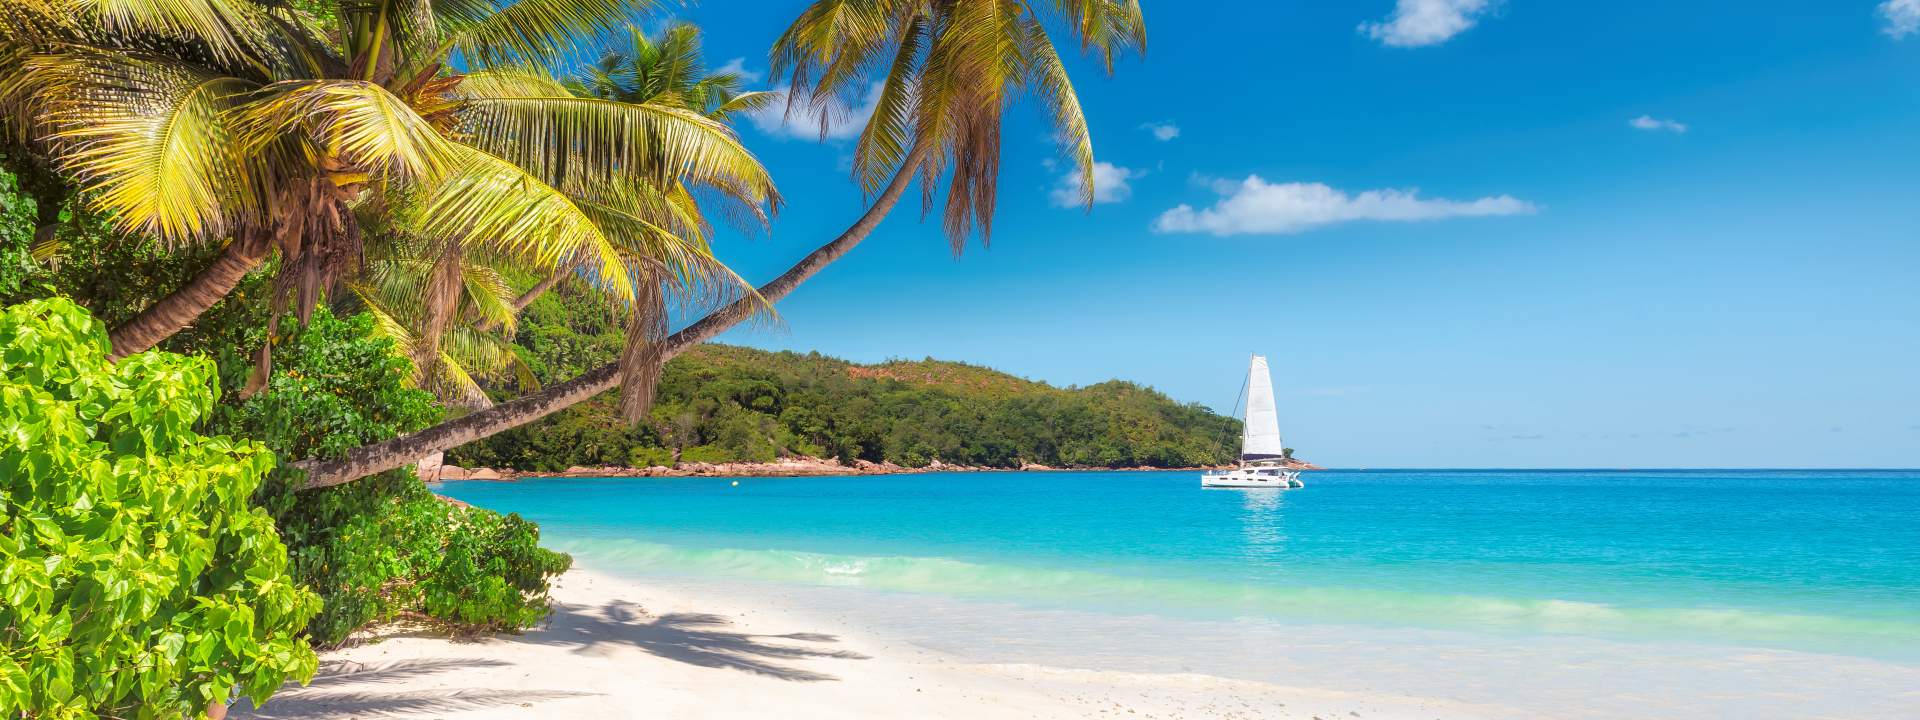 5 Days exploring the natural wonders of the Seychelles